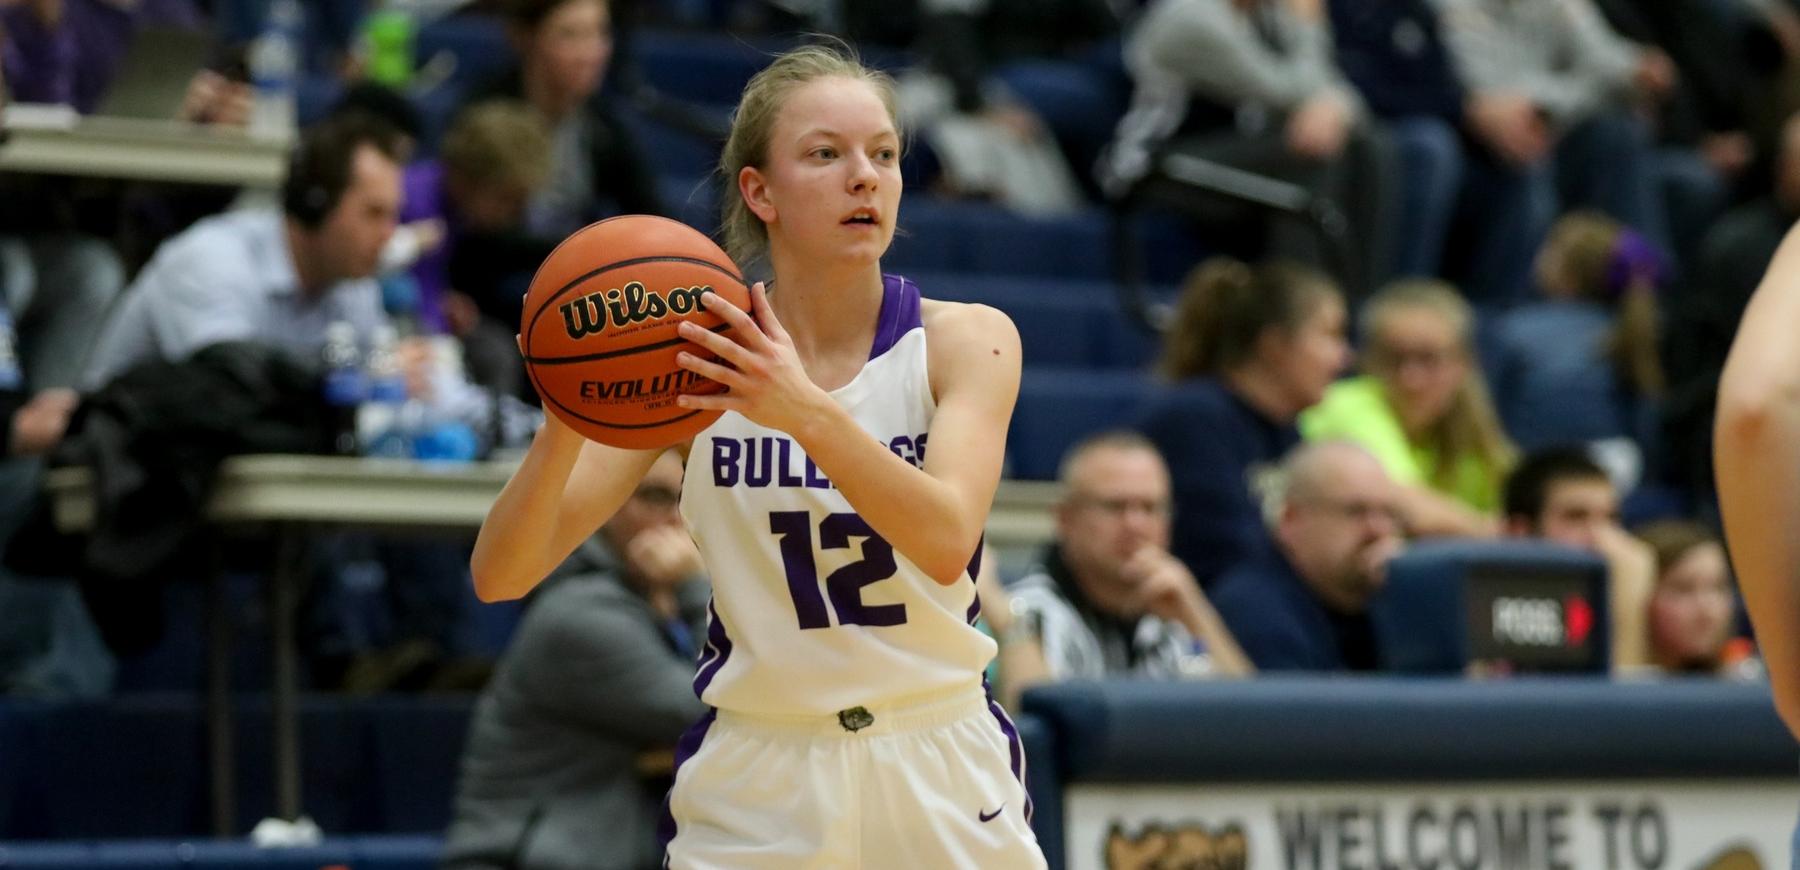 No.12/14 @bhsdogsghoops blows away Plainfield for county crown